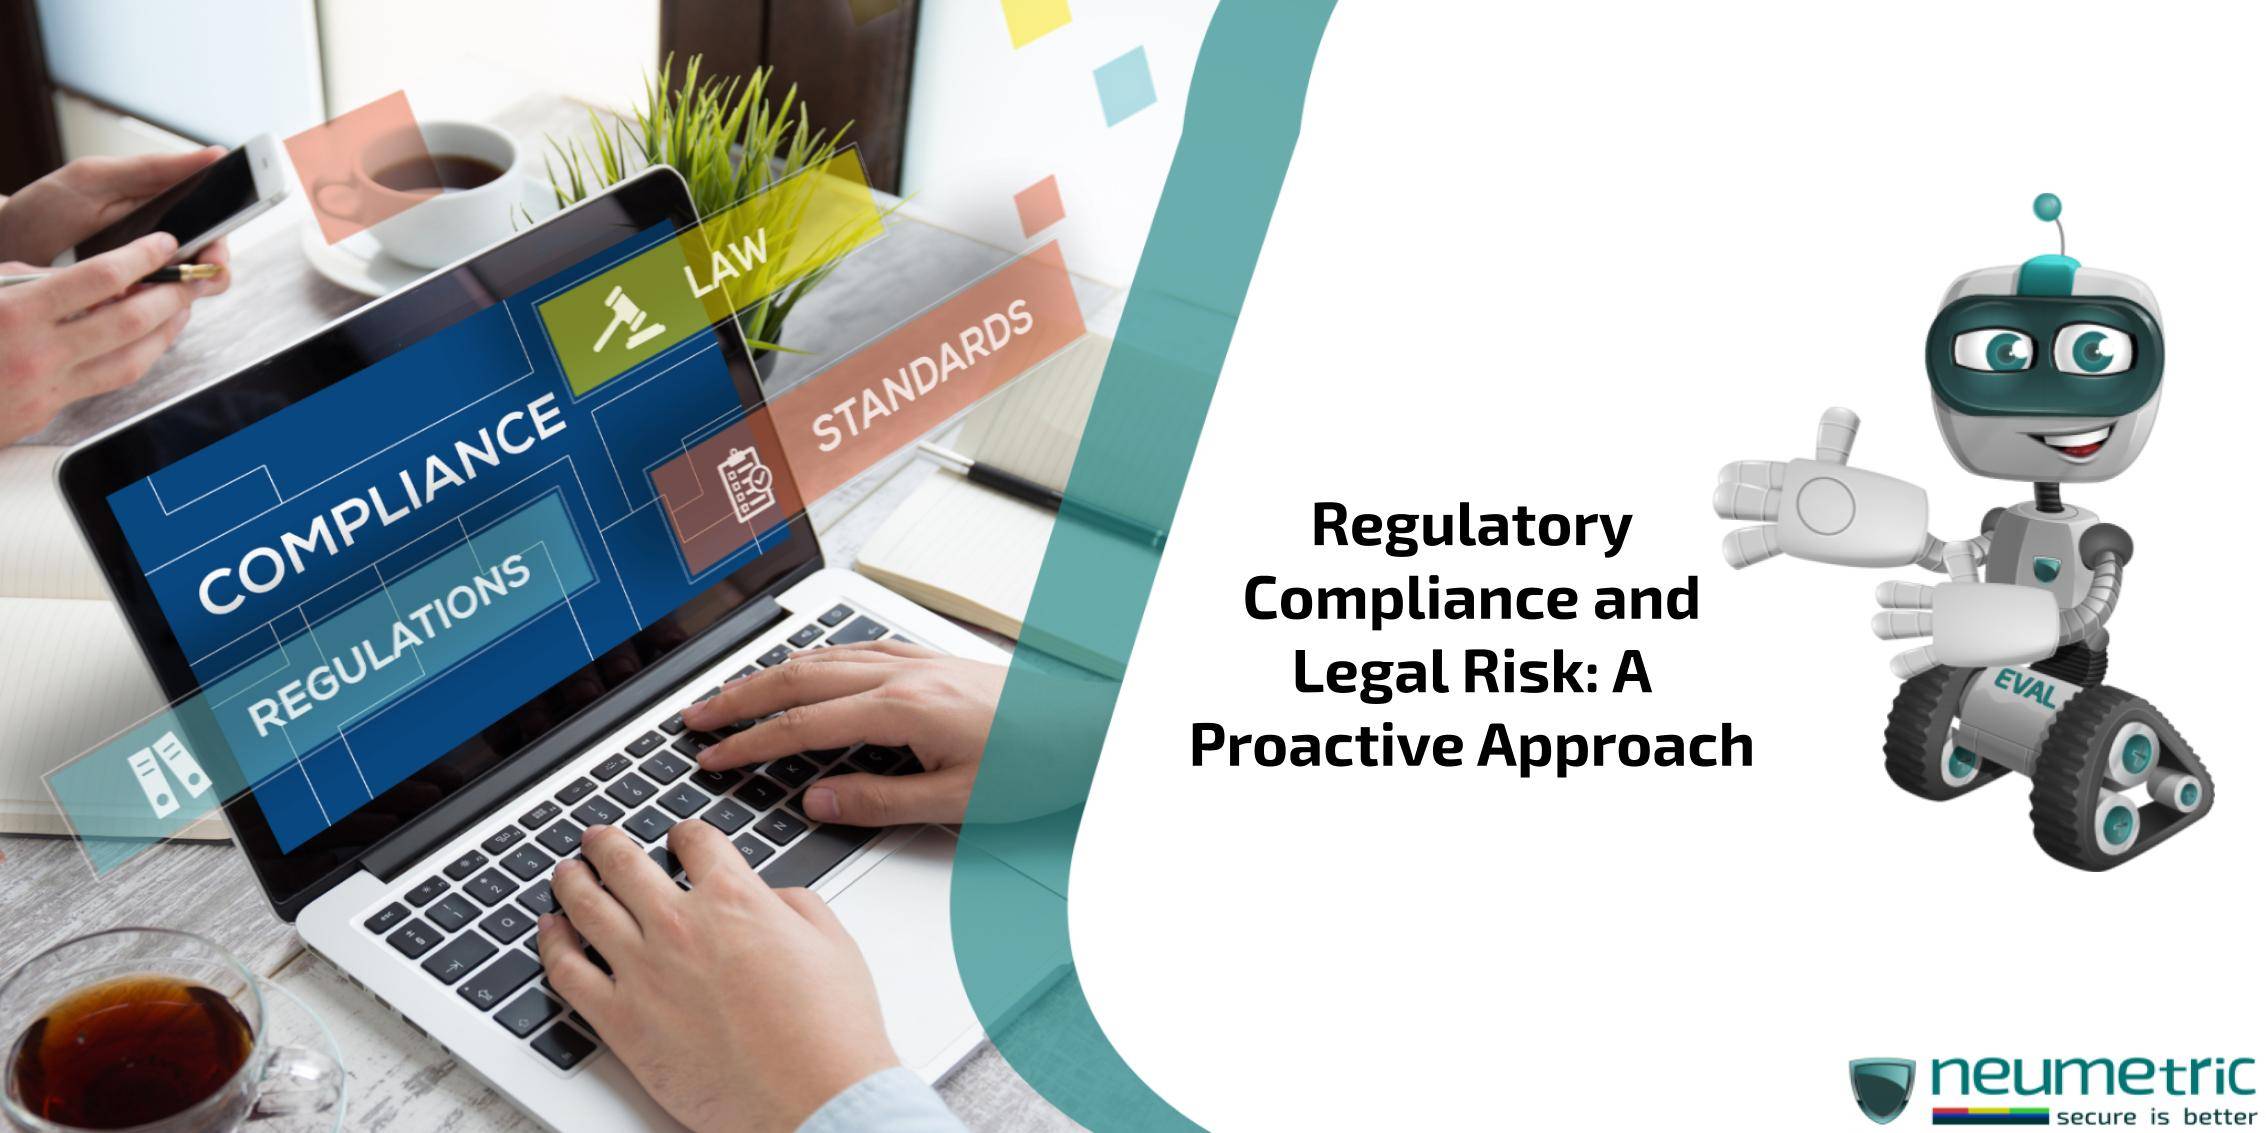 Regulatory Compliance and Legal Risk: A Proactive Approach